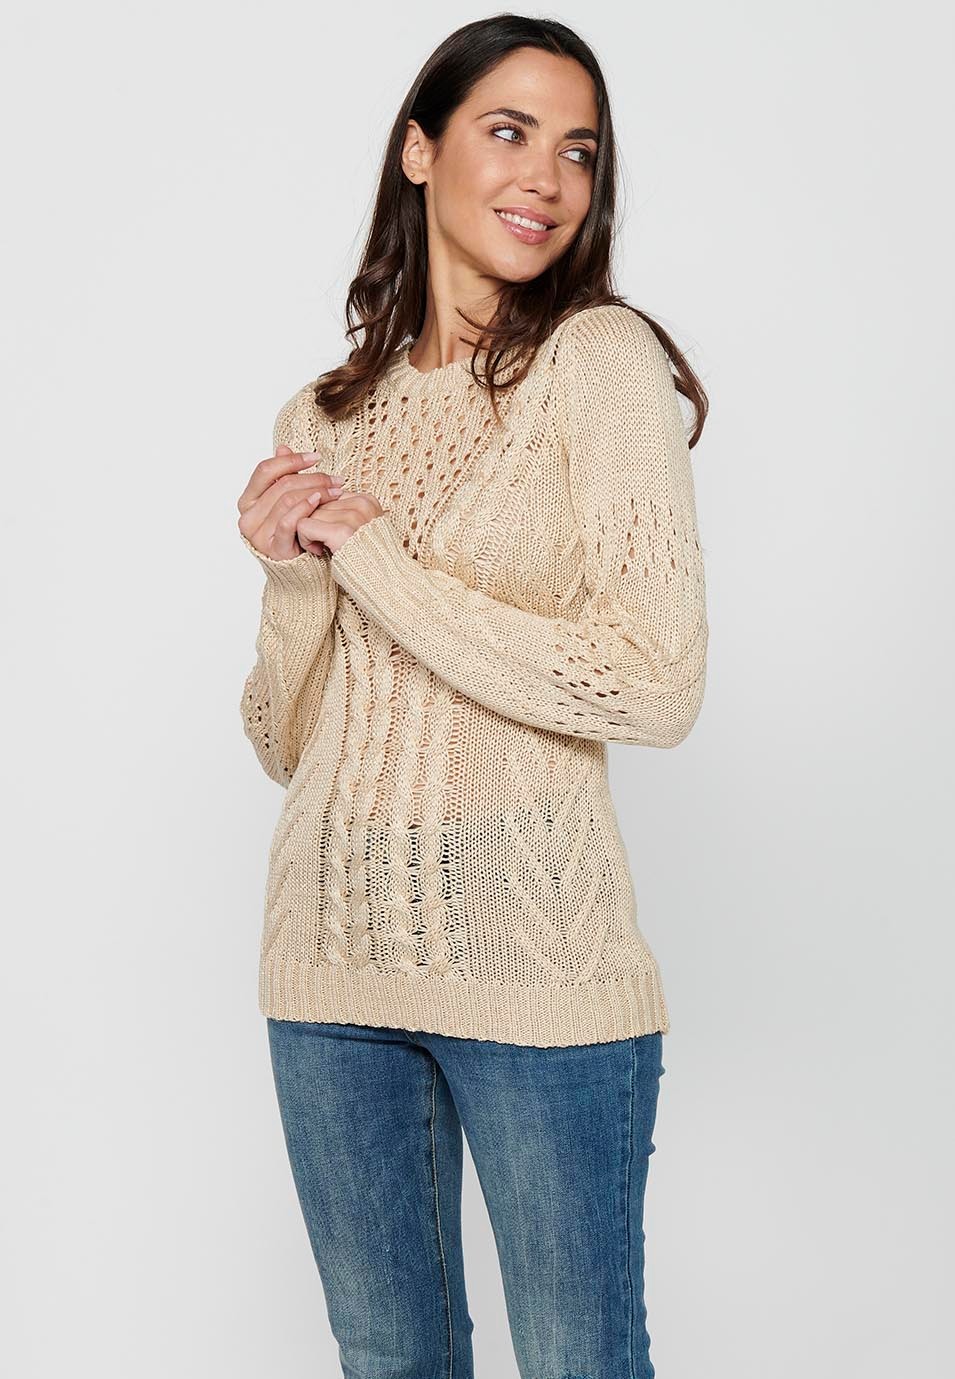 Long sleeve sweater with round neck. Beige Openwork Front Tricot for Women 7